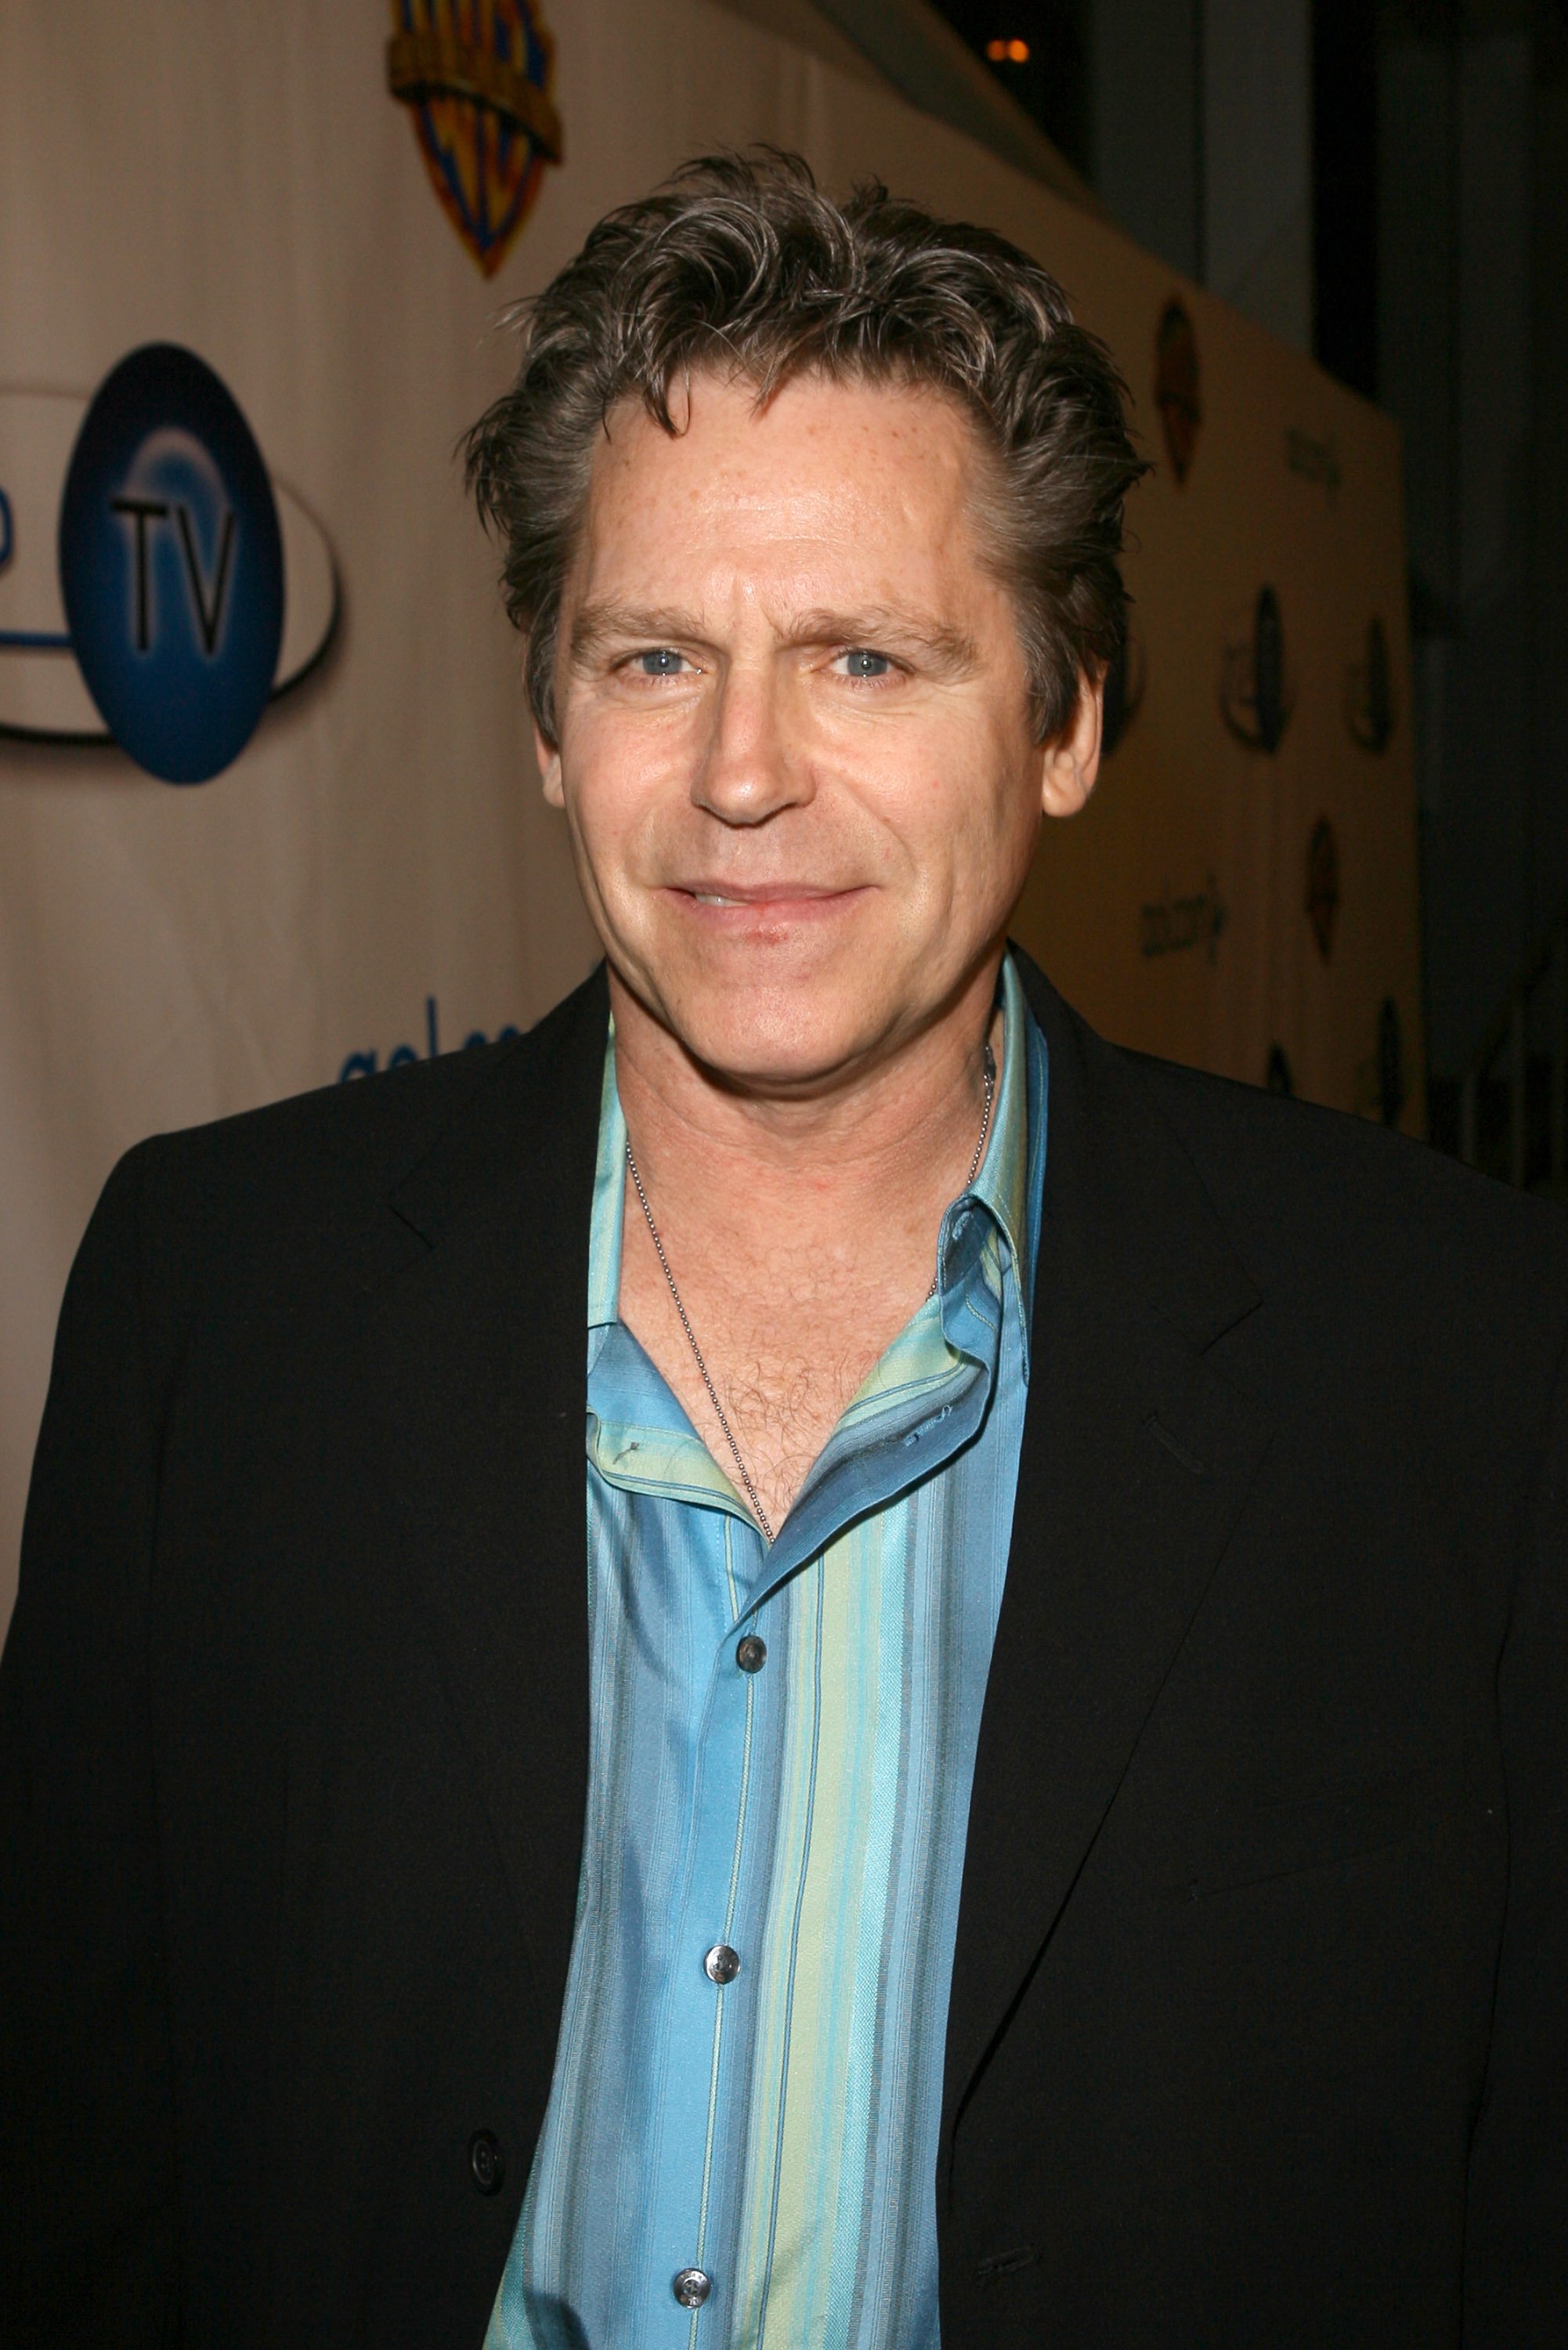 An undated image of Jeff Conaway at the Museum of Television and Radio in Los Angeles, California | Photo: Getty Images